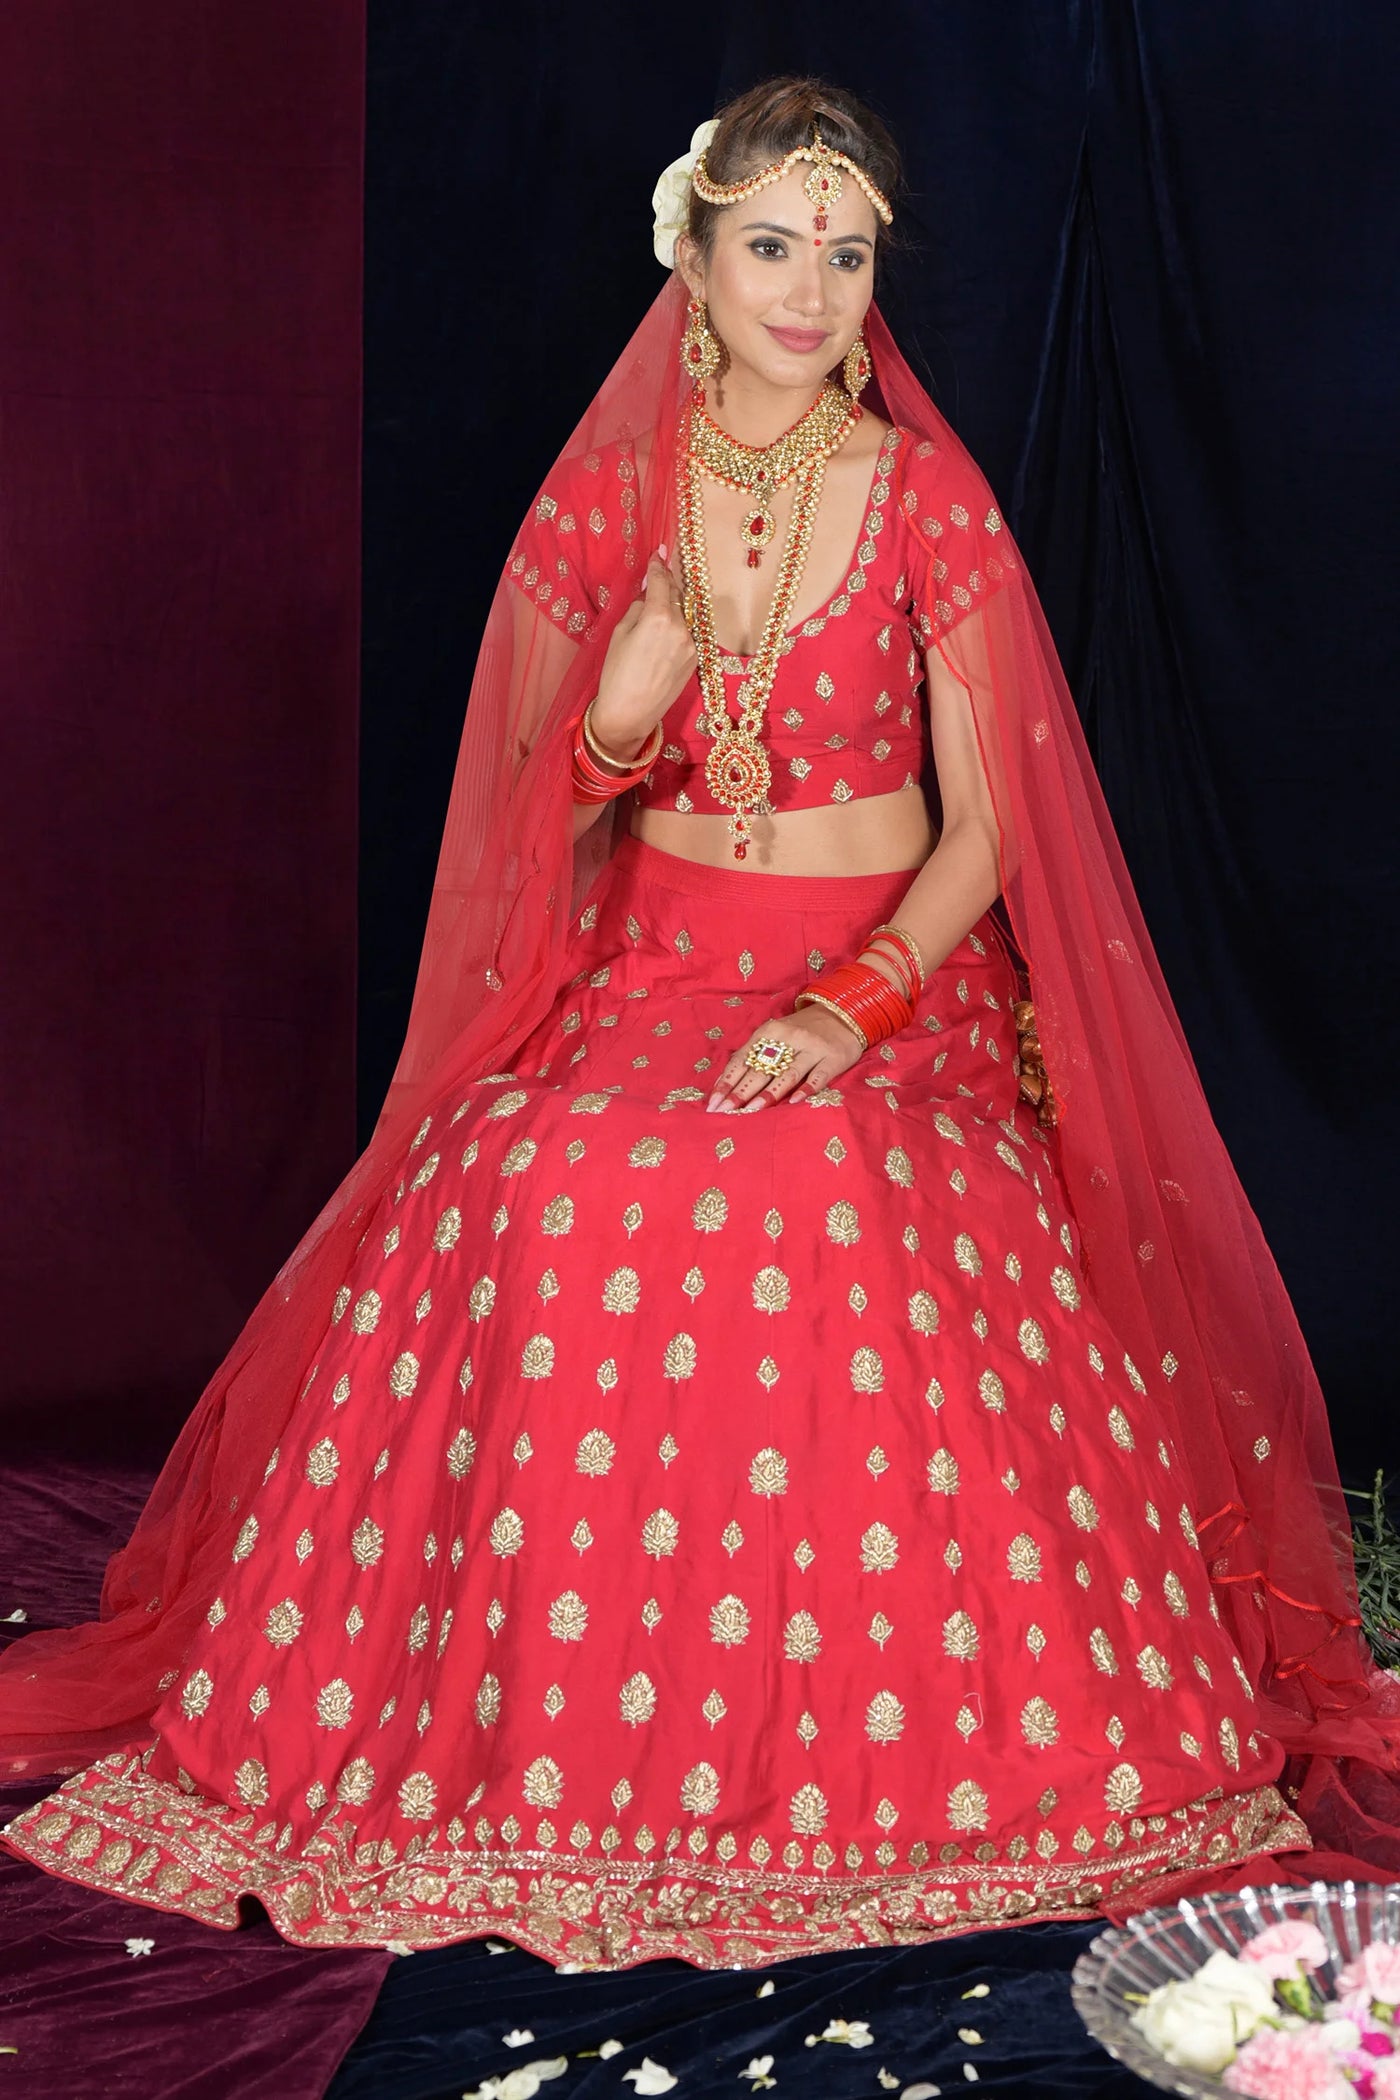 Silk Embroidered Lehenga Set - Indian Clothing in Denver, CO, Aurora, CO, Boulder, CO, Fort Collins, CO, Colorado Springs, CO, Parker, CO, Highlands Ranch, CO, Cherry Creek, CO, Centennial, CO, and Longmont, CO. Nationwide shipping USA - India Fashion X